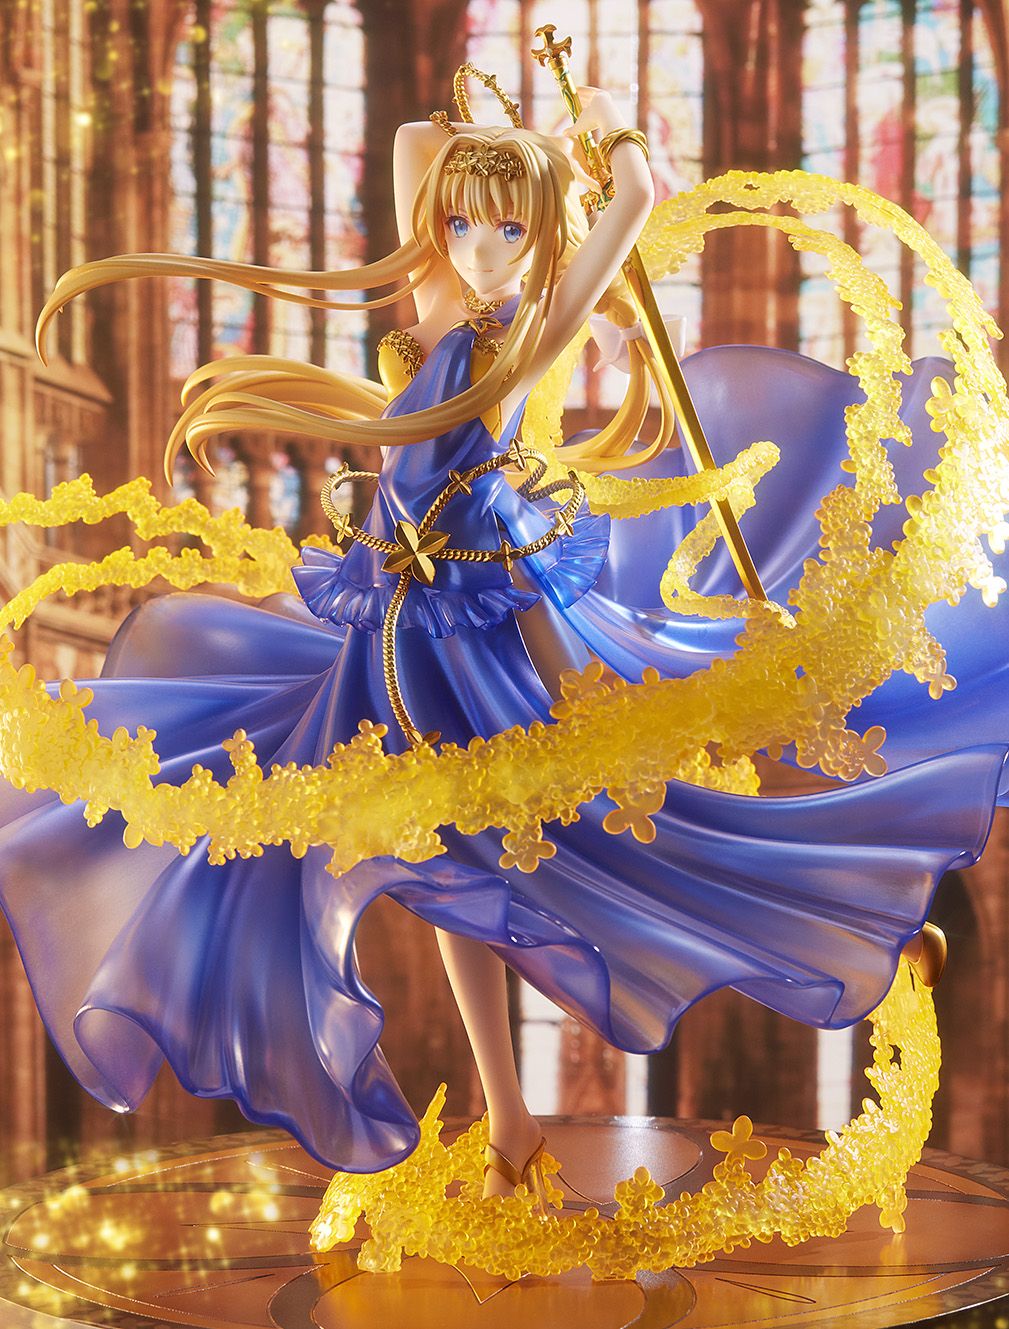 Alice Synthesis Thirty Crystal Dress Ver. The Fragrant Olive Sword 1/7 Scale Figure SAO Sword Art Online SHIBUYA SCRANBLE FIGURE